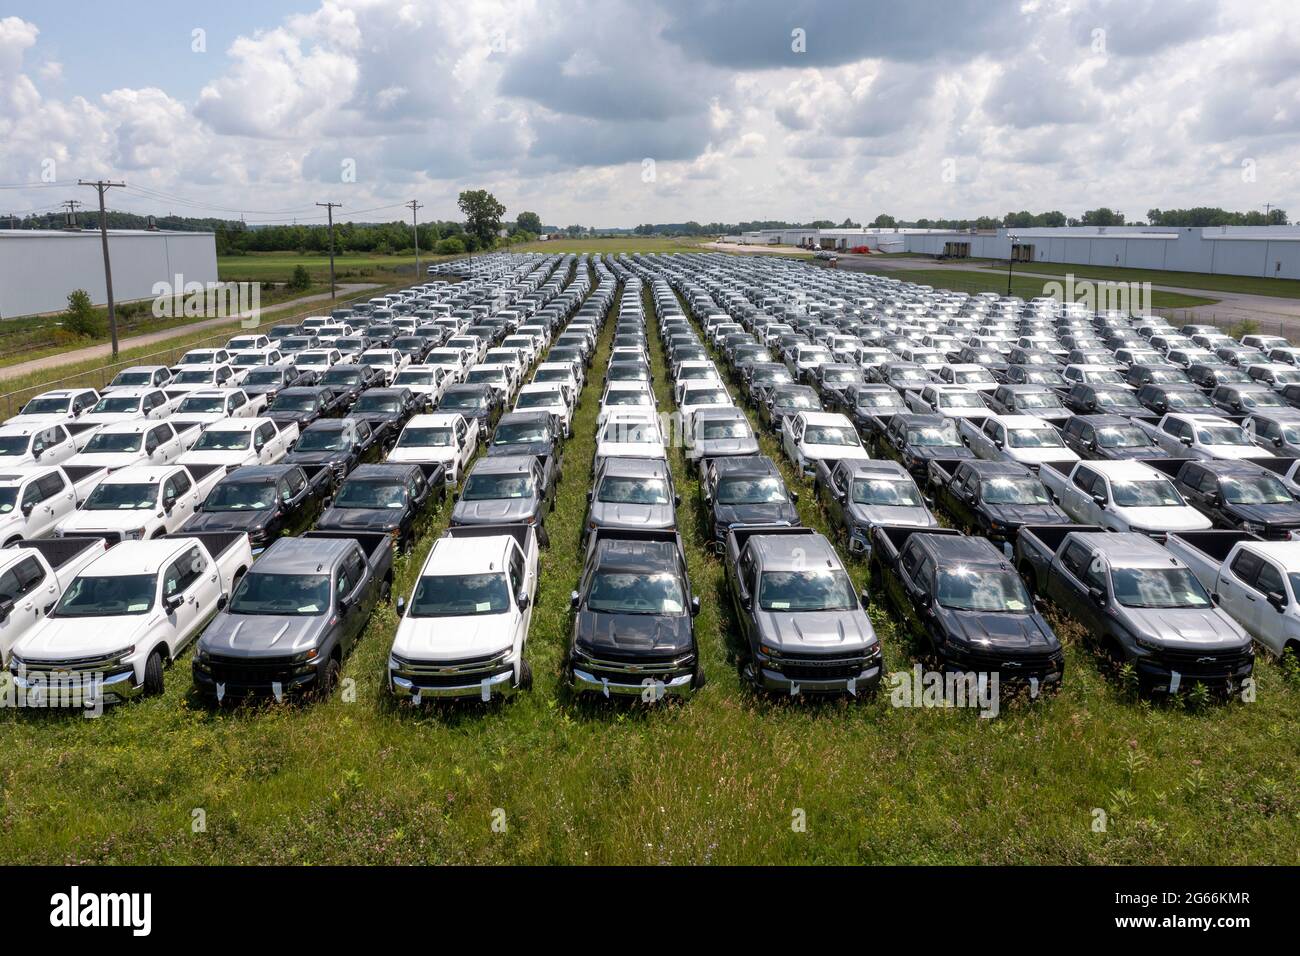 Fort Wayne, Indiana - New GMC and Chevrolet pickup trucks are parked, unable to be sold, because of the global shortage of semiconductor chips. The tr Stock Photo